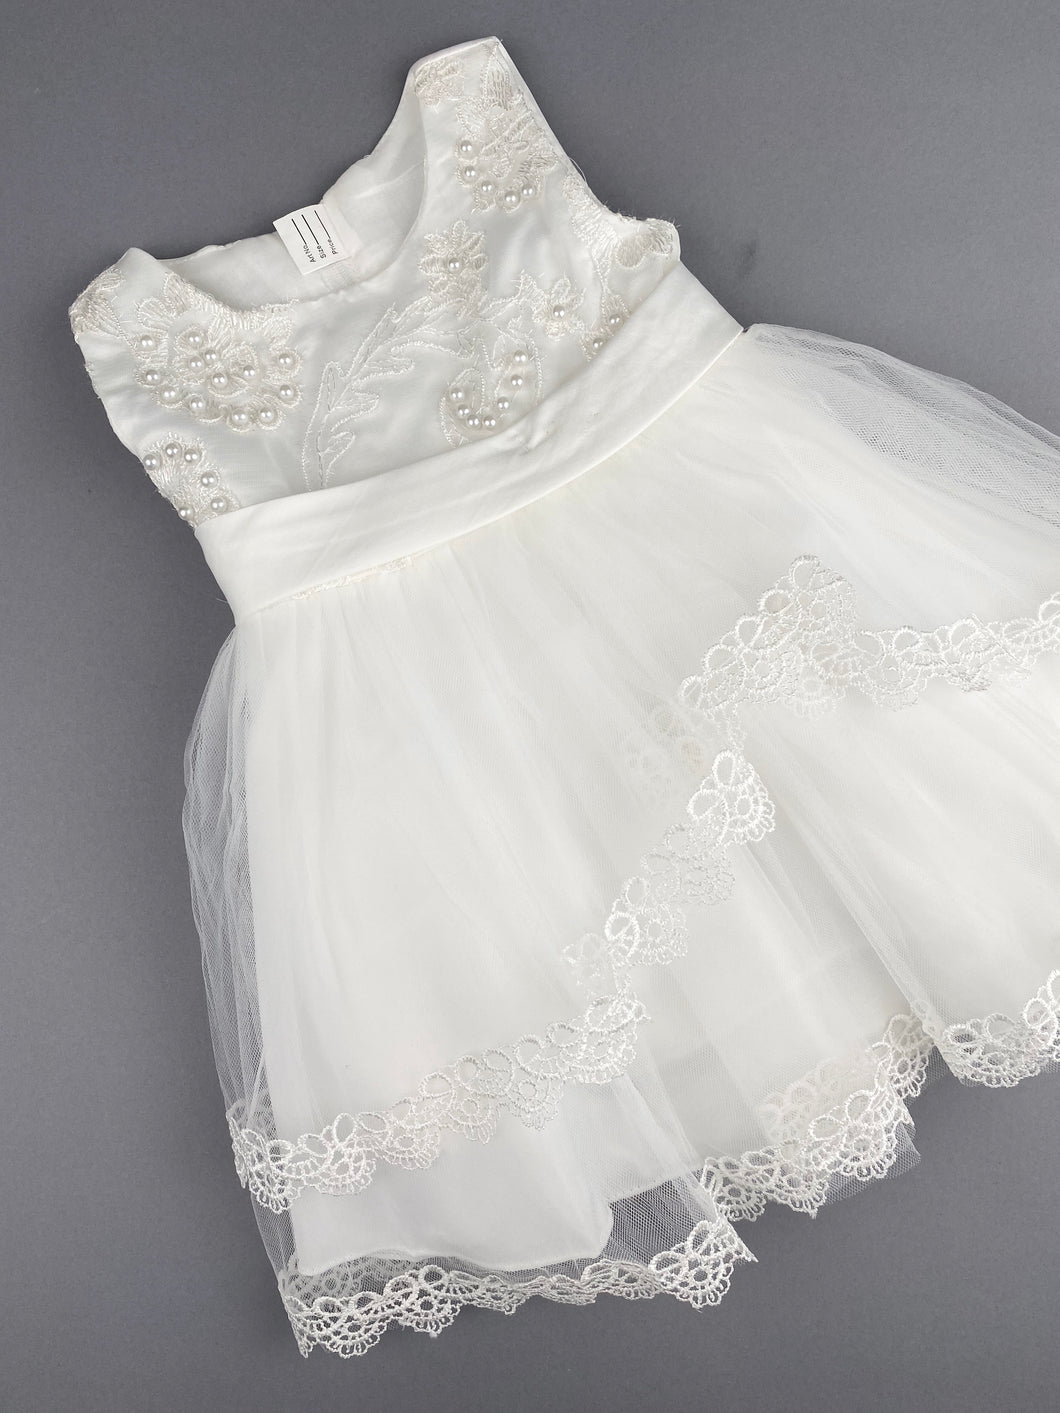 Girls Christening Baptismal Embroidered Dress 46 with Pearls